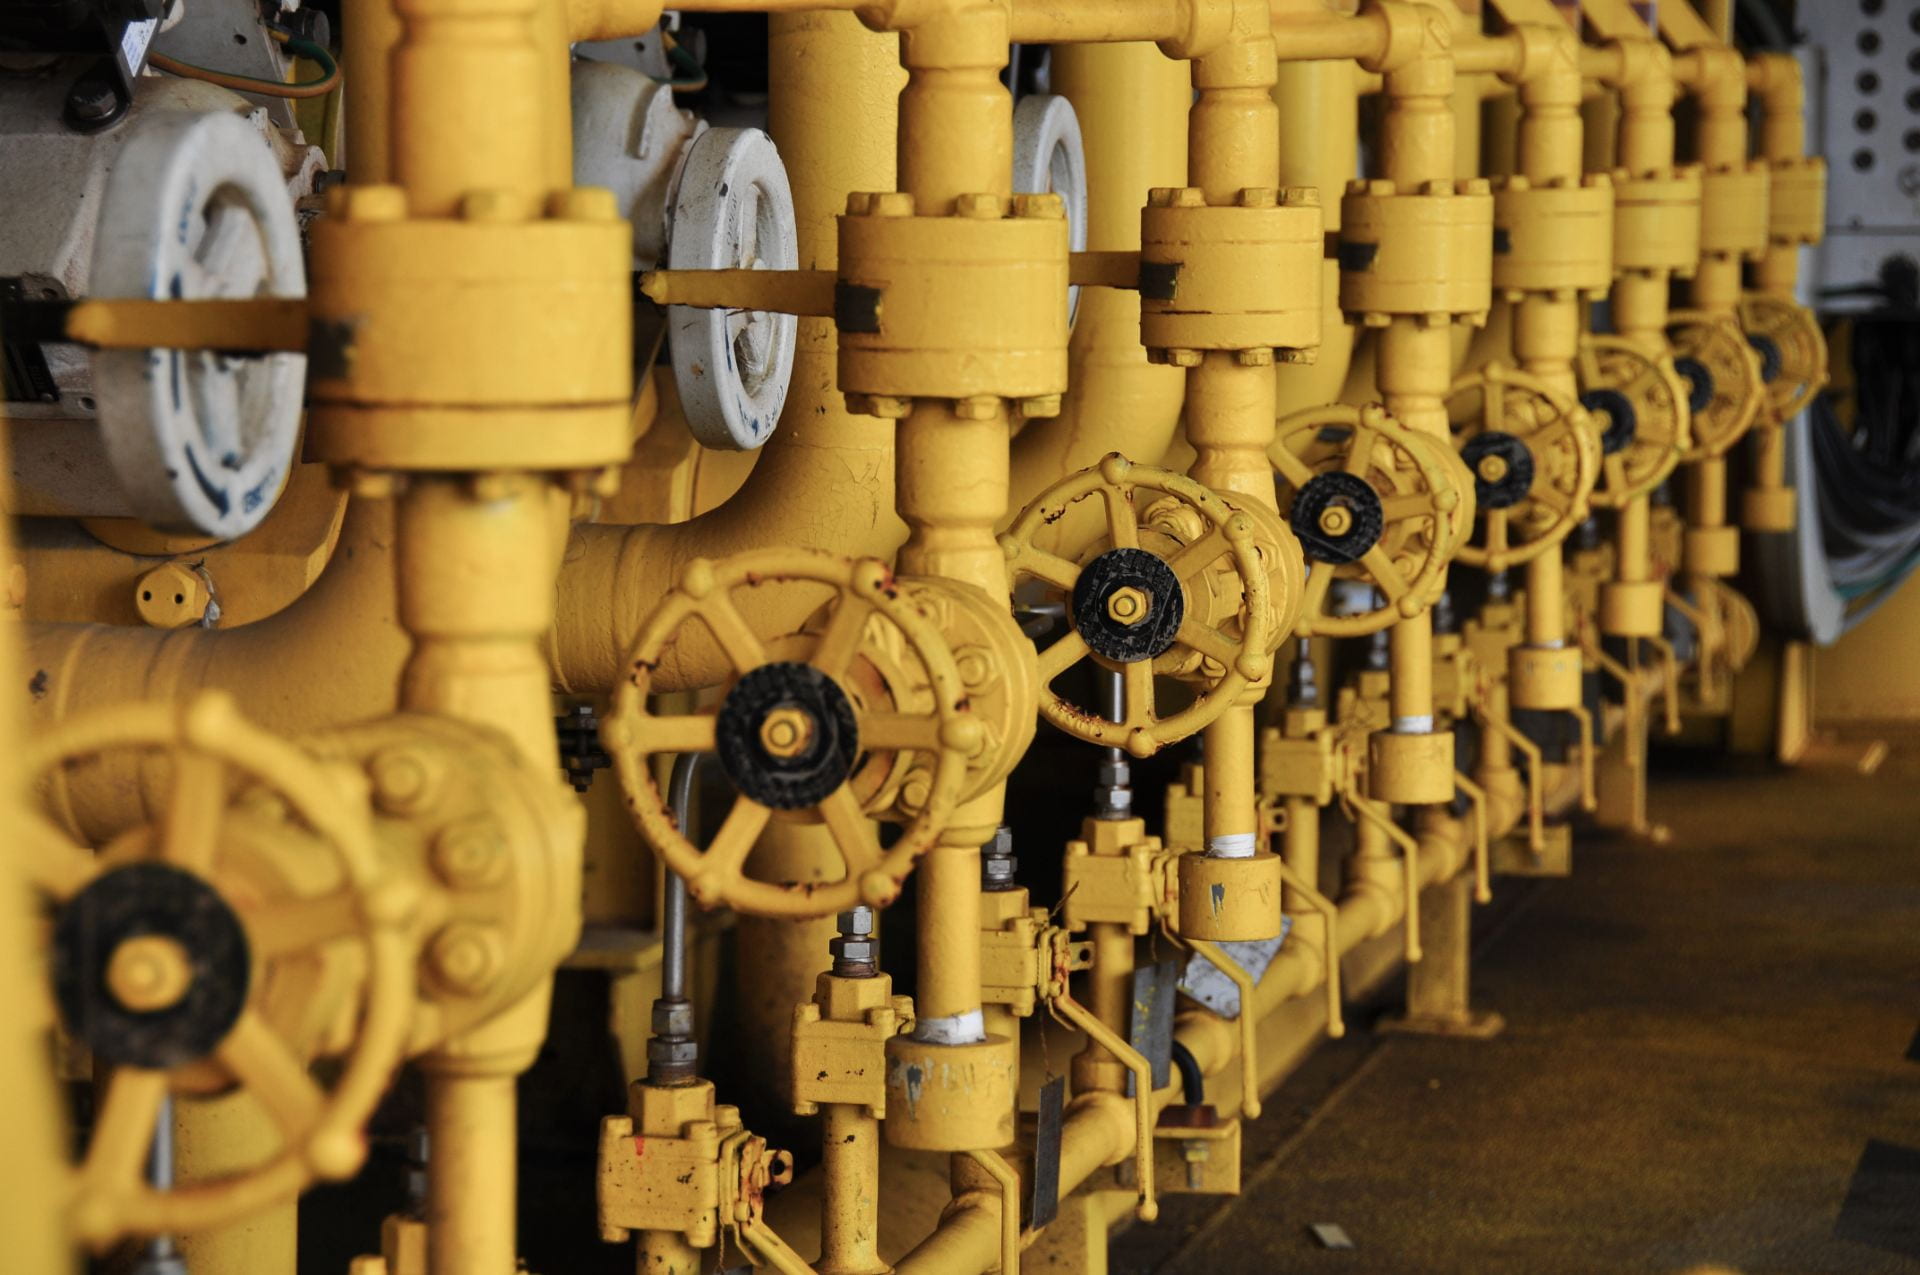 The image shows yellow pipes and valves